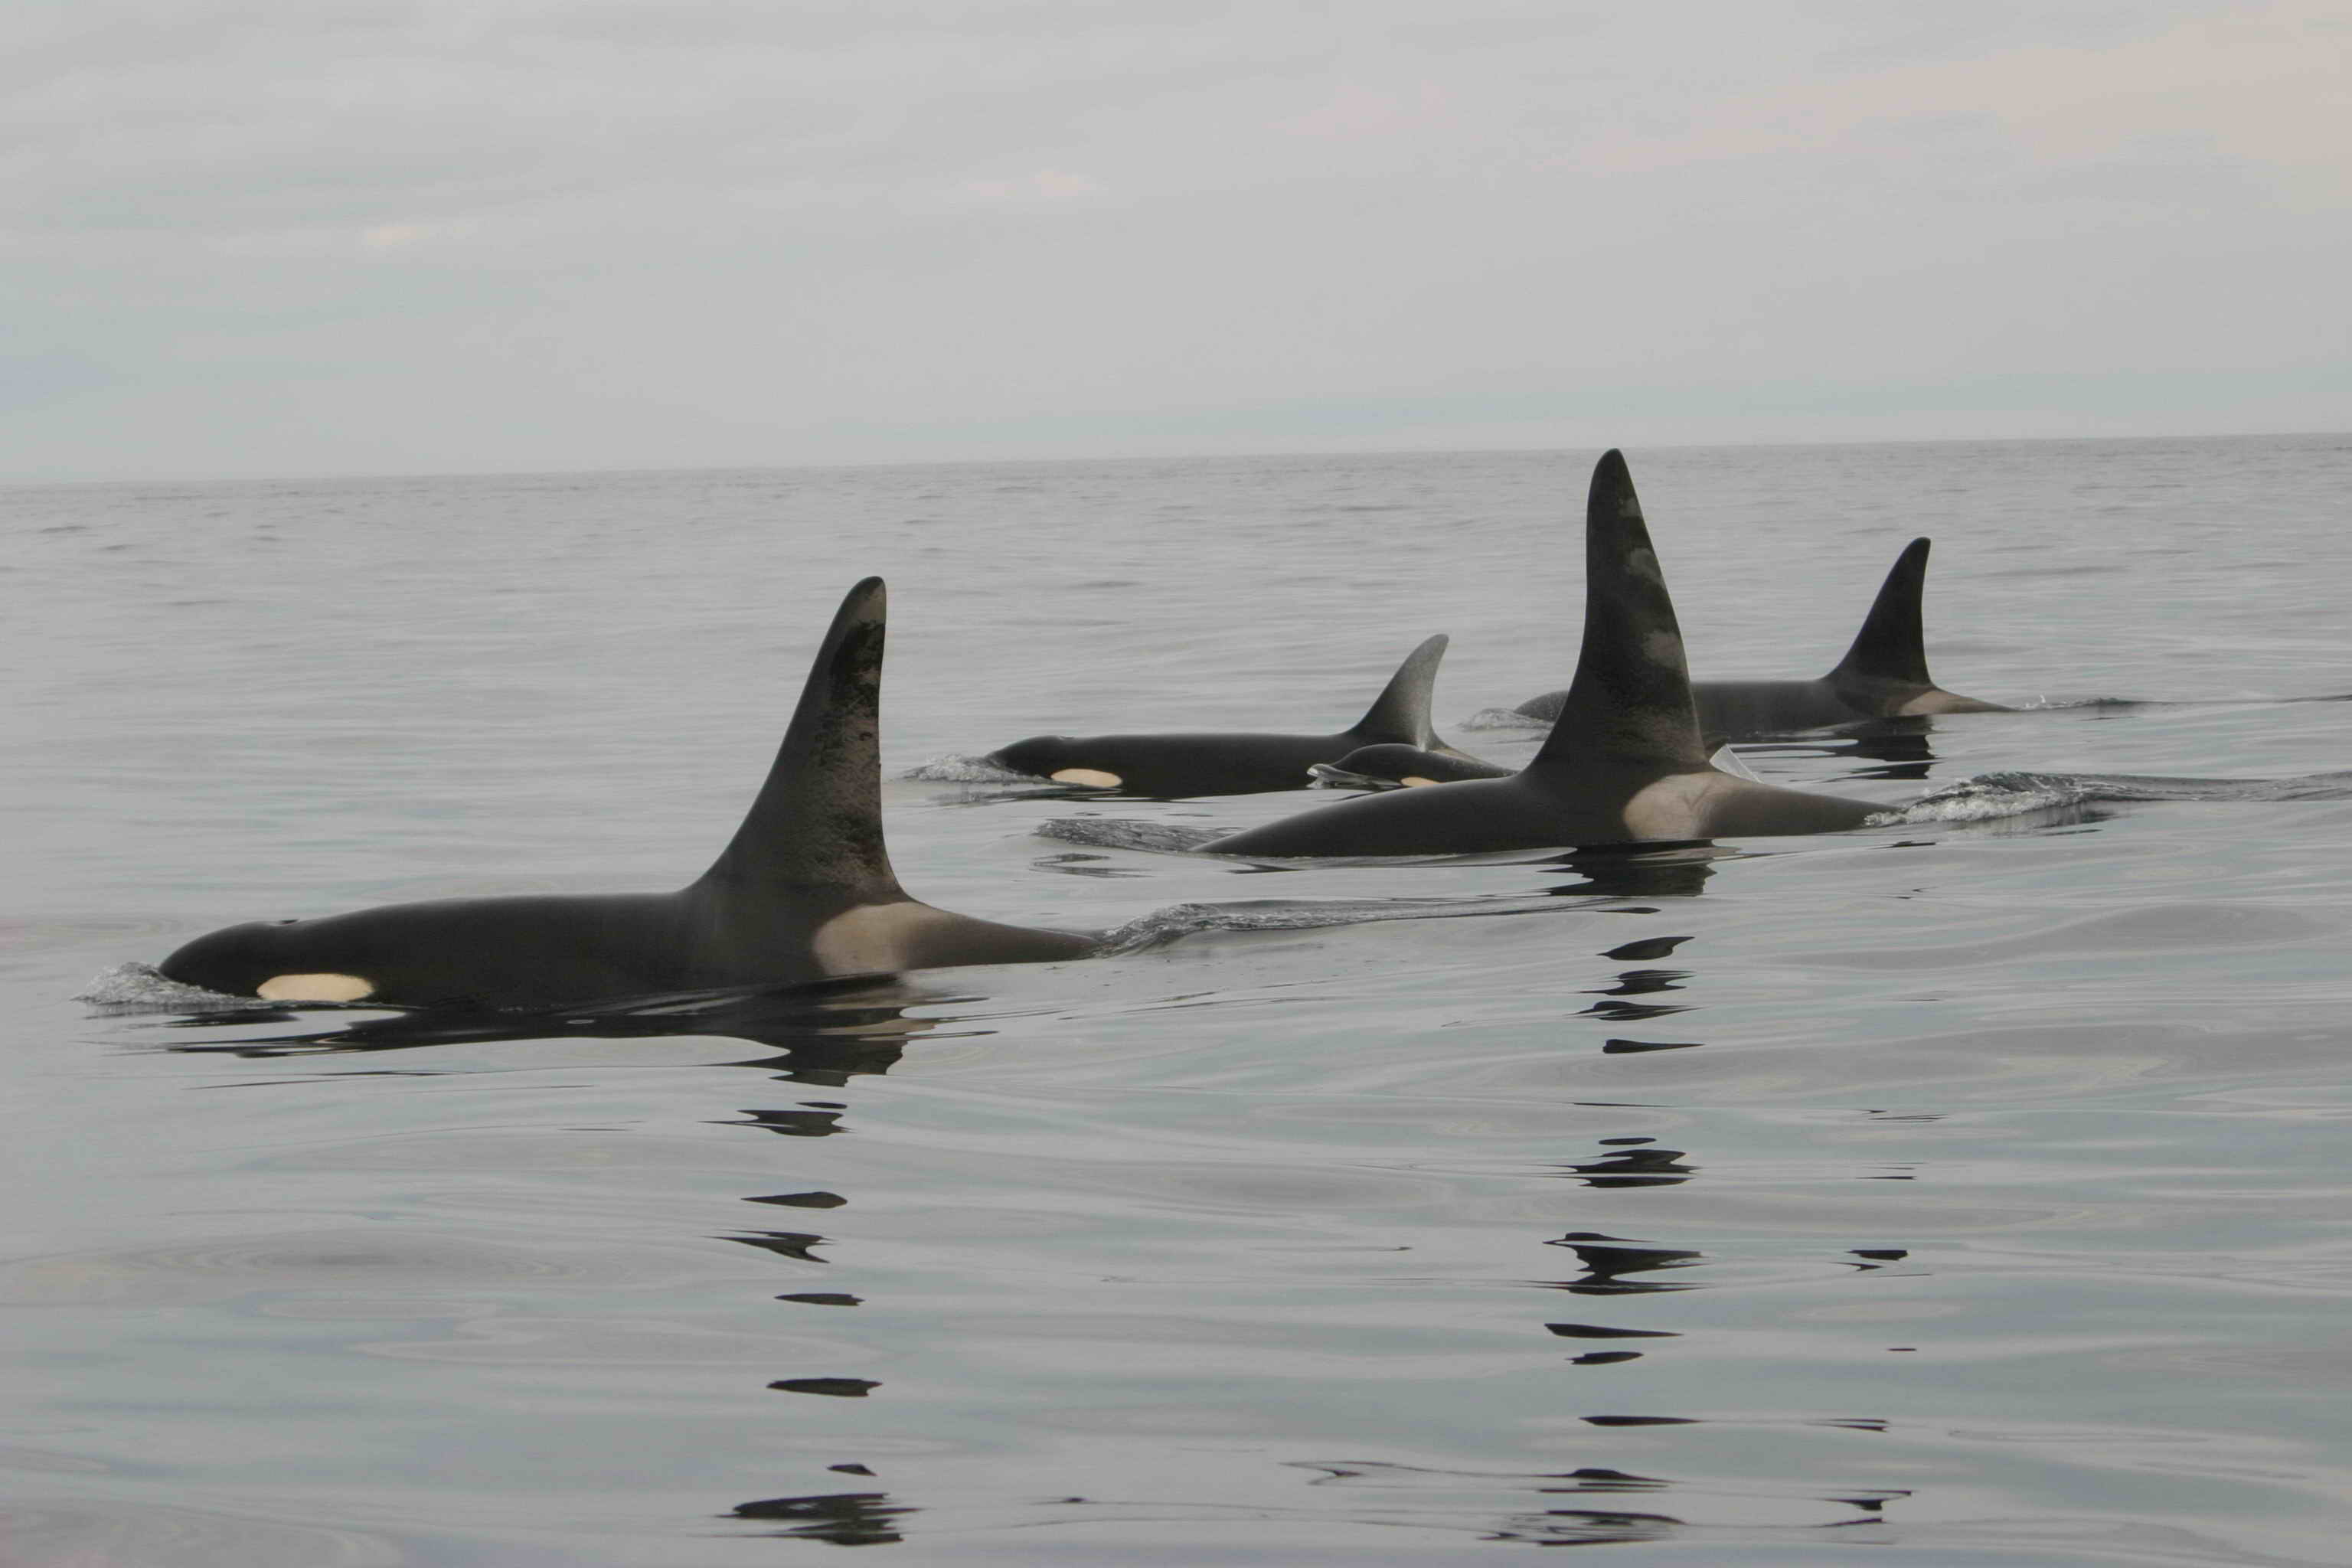 Study Finds Other Marine Mammals Pose Threat For Endangered Orca Whales